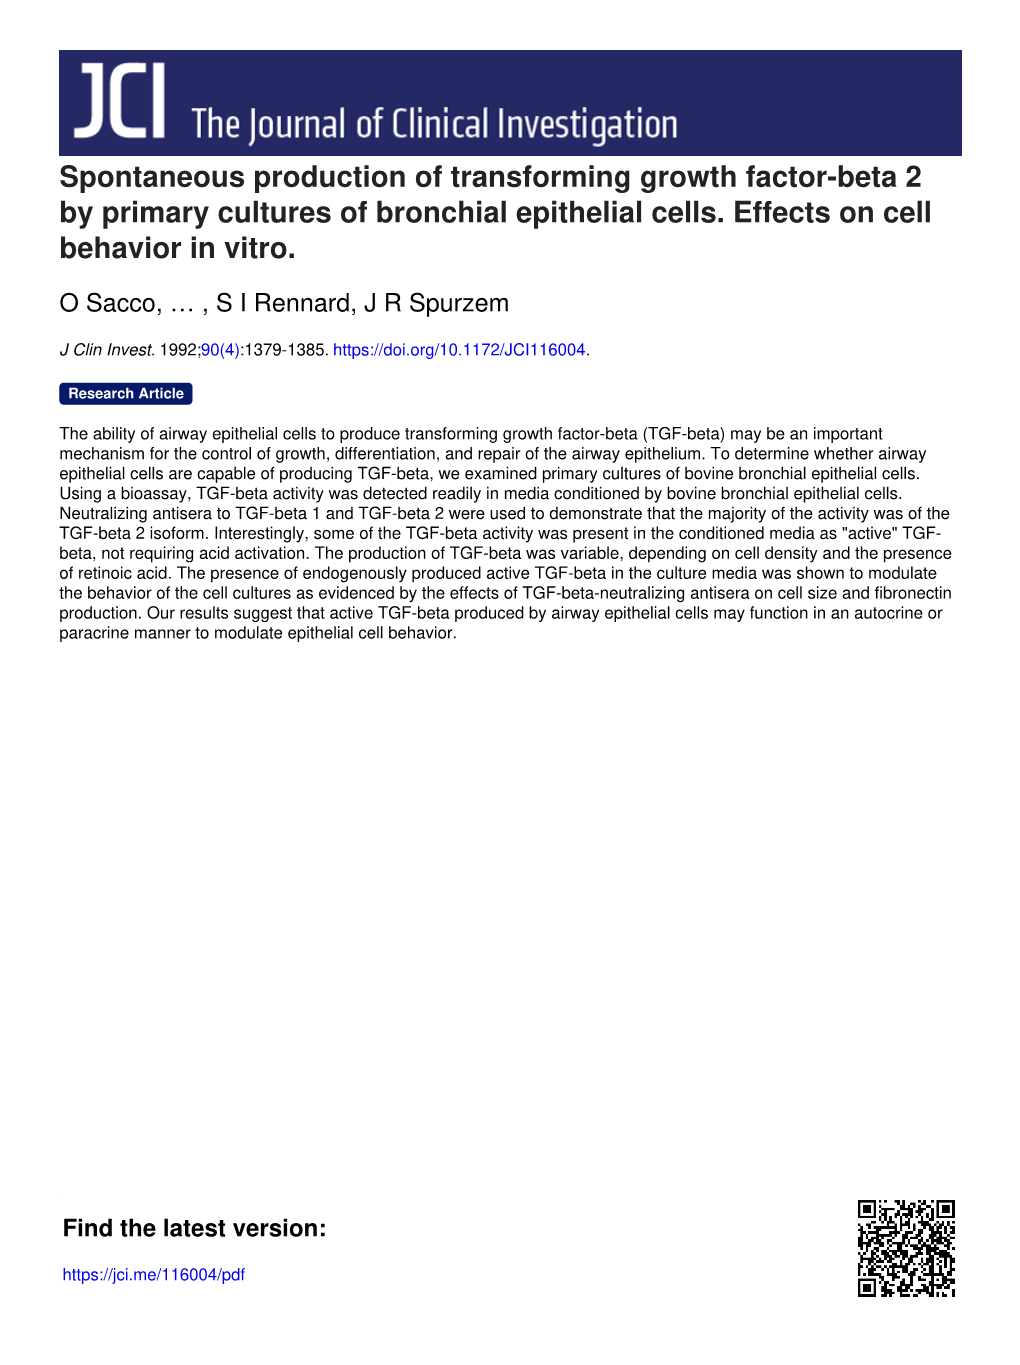 Spontaneous Production of Transforming Growth Factor-Beta 2 by Primary Cultures of Bronchial Epithelial Cells